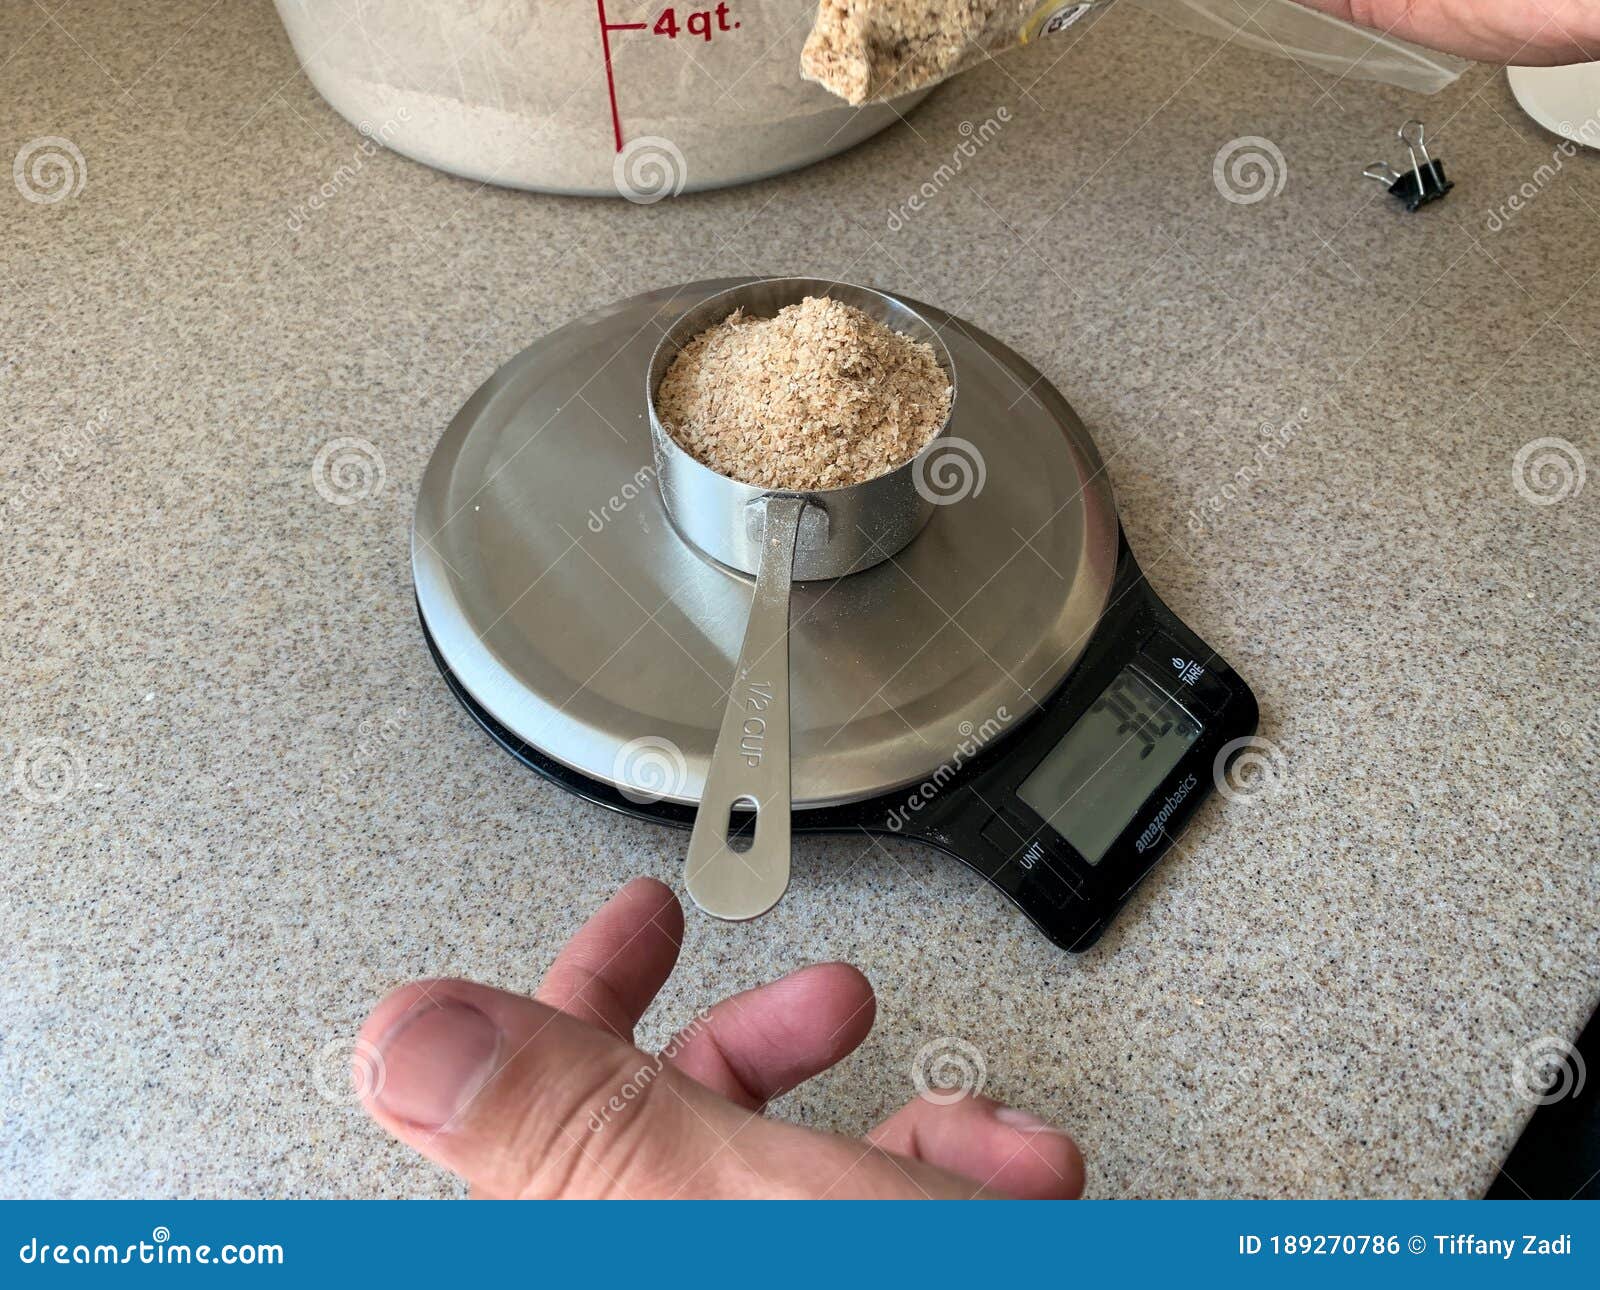 https://thumbs.dreamstime.com/z/measuring-ingredients-food-scale-home-baking-bread-covid-measuring-ingredients-food-scale-home-189270786.jpg